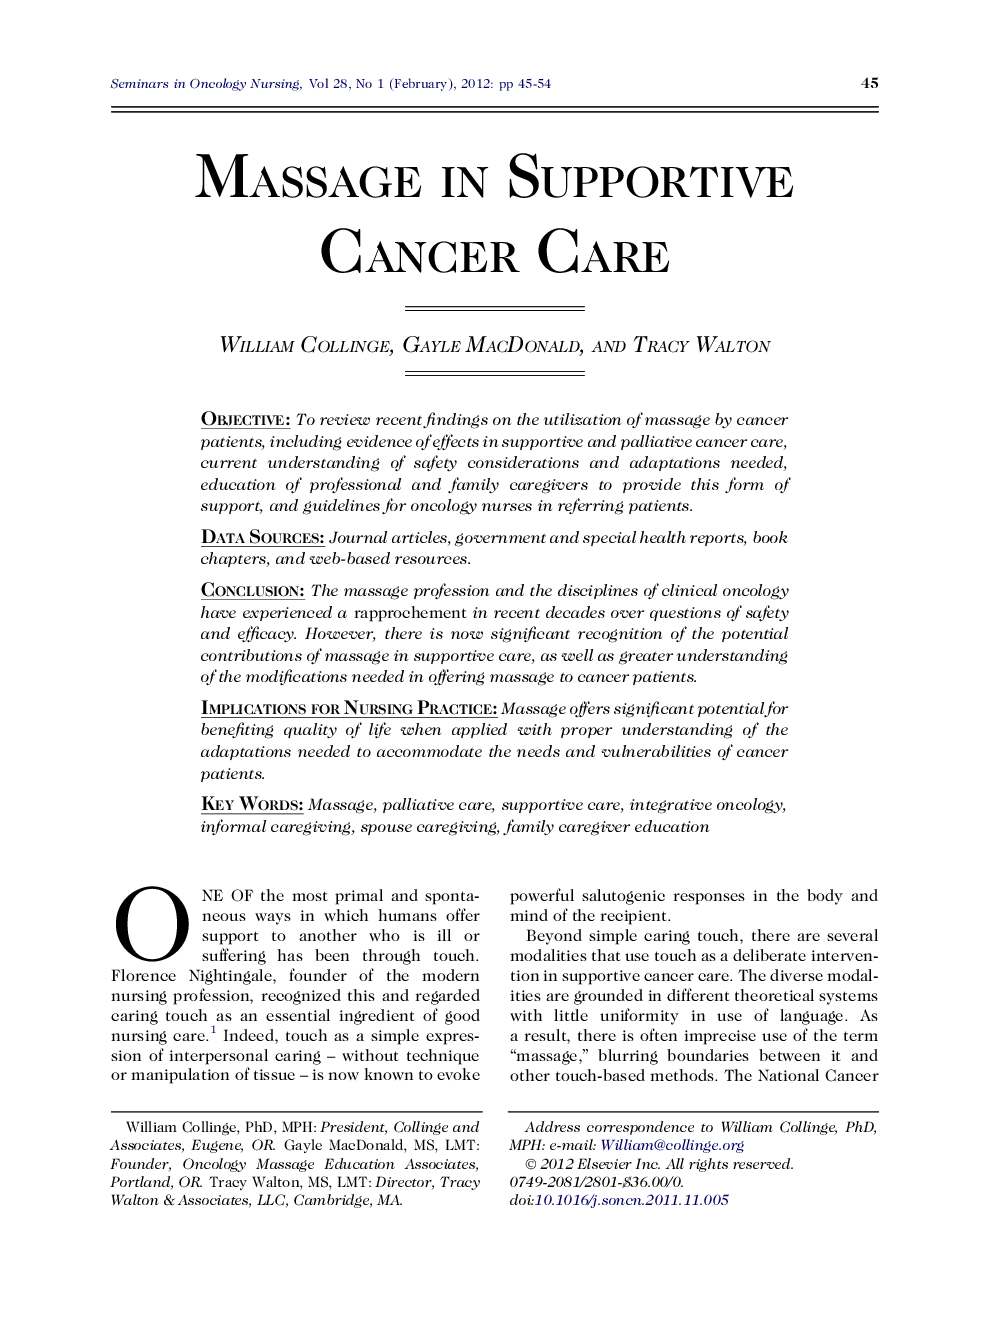 Massage in Supportive Cancer Care